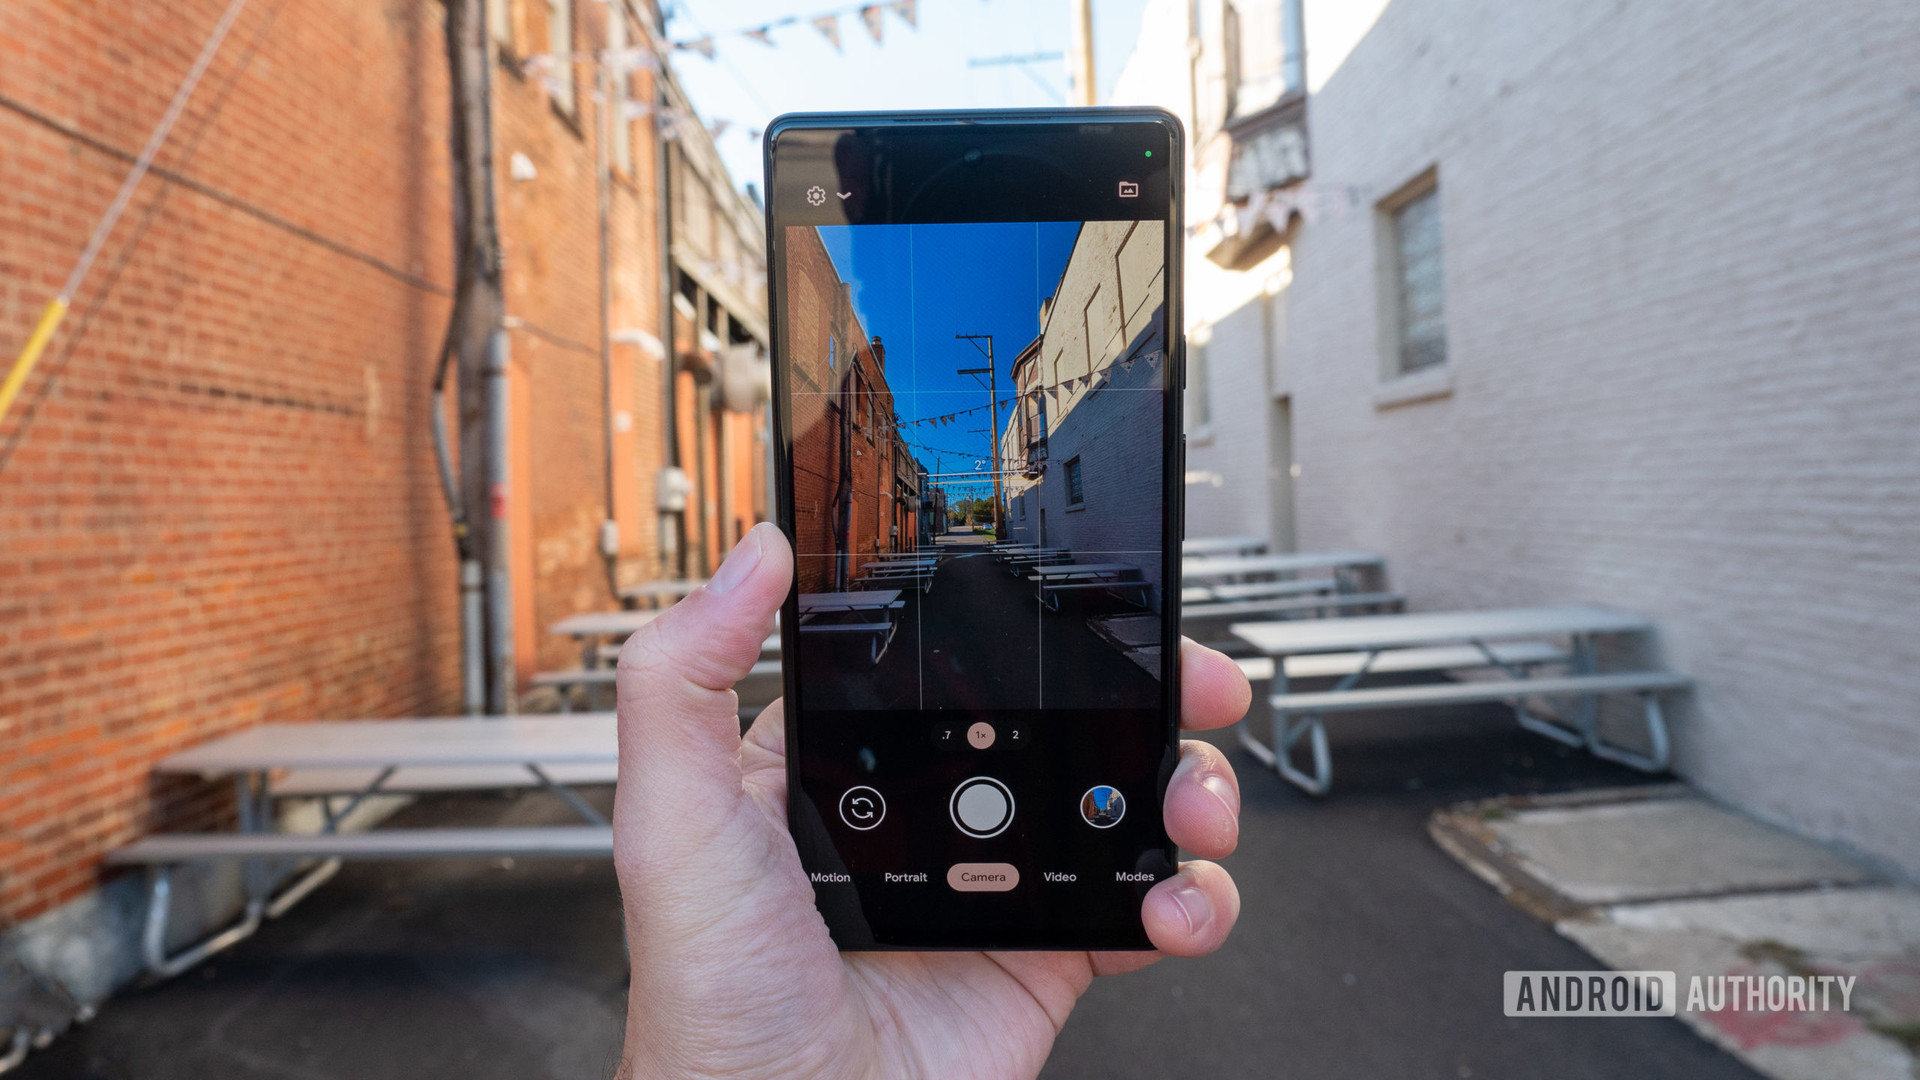 The Google Pixel 6 in hand in an alley showing the camera app